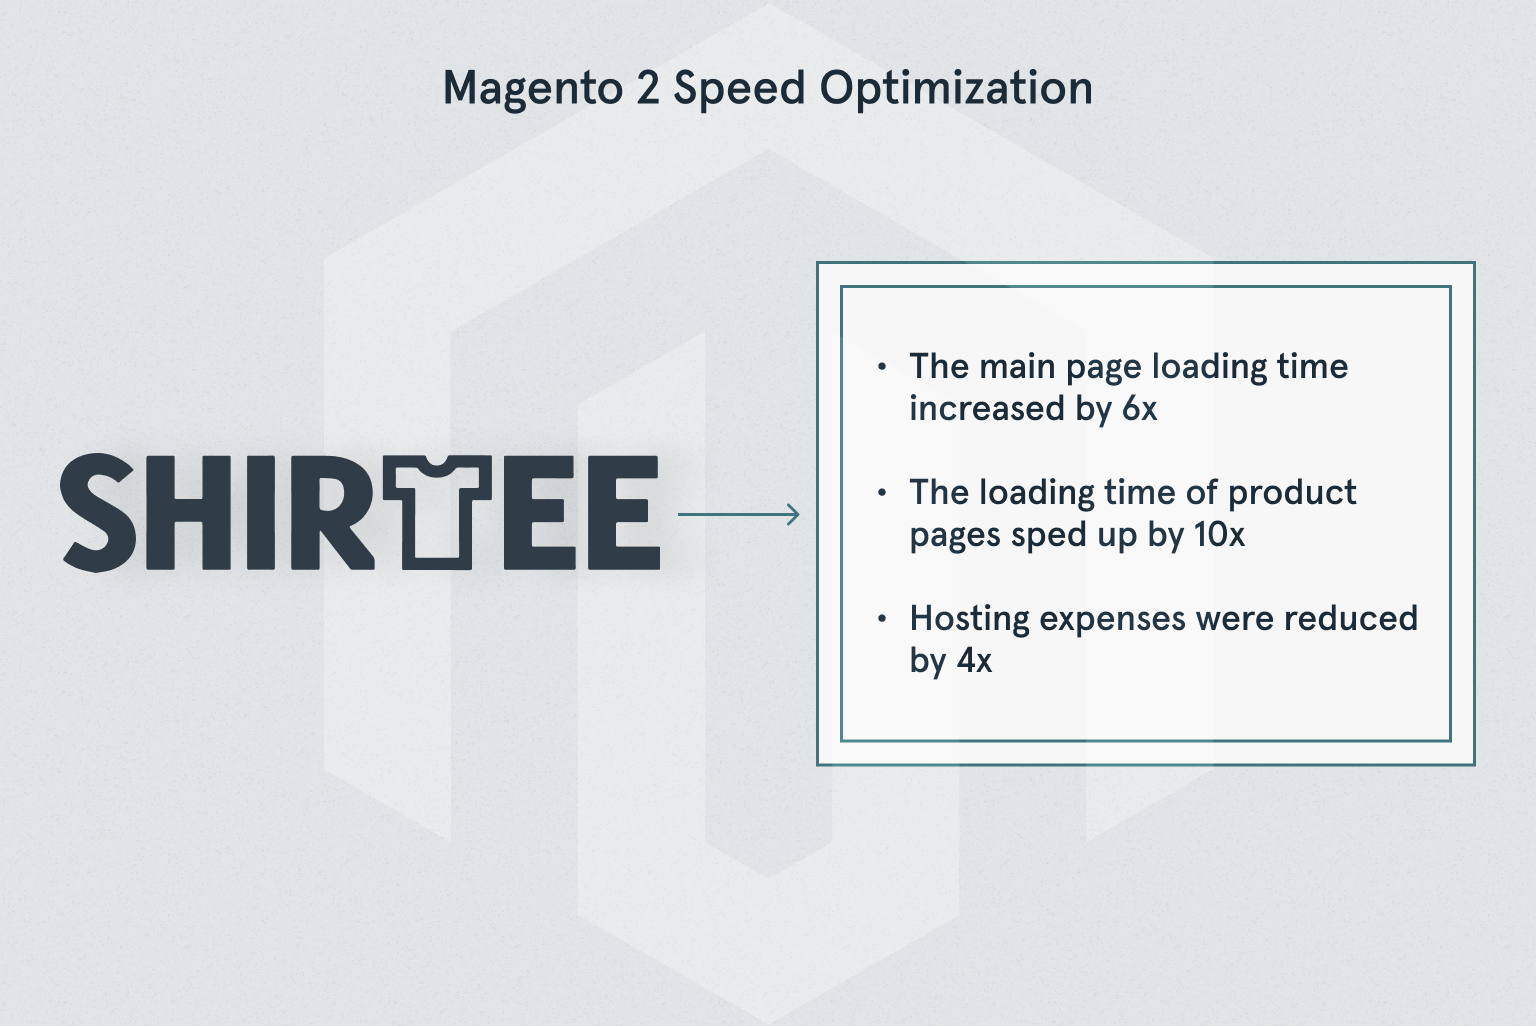 Magento 2 Speed Optimization Results for a Real Project